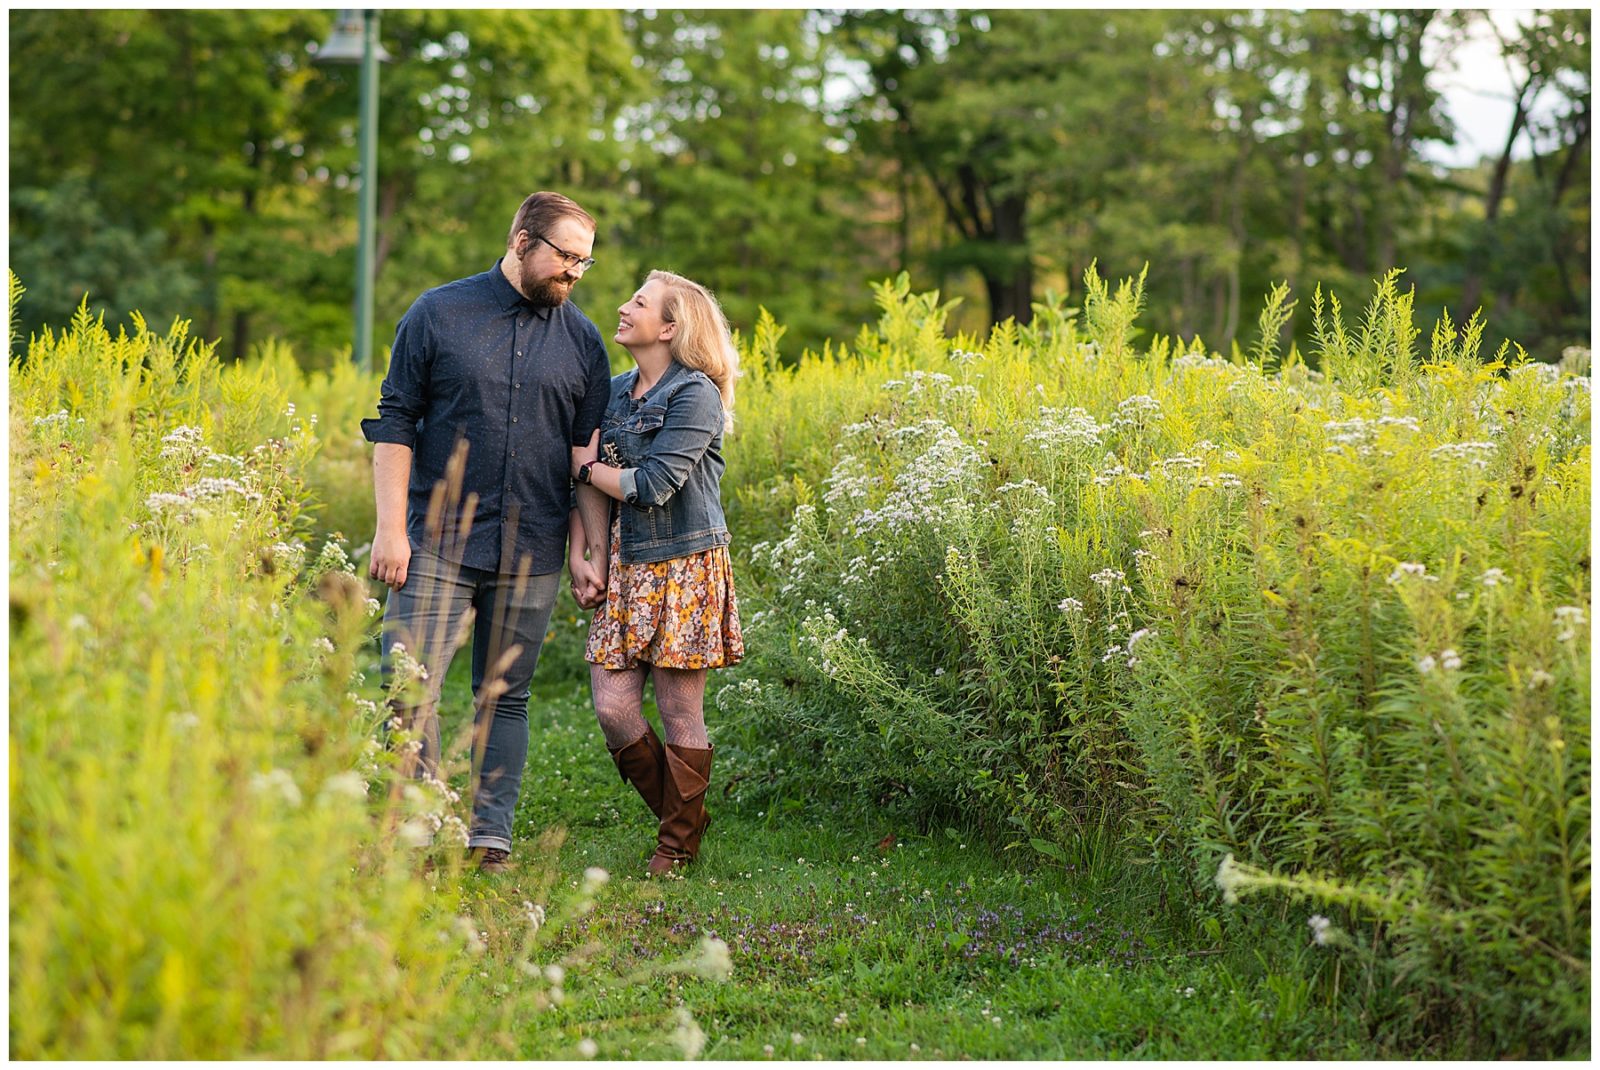 An August Ohio Engagement Session, fun and candid photos, engagement session outfit ideas, blue button down, jean jacket, outfit ideas, silly moments, wildflower field, metropark engagement session